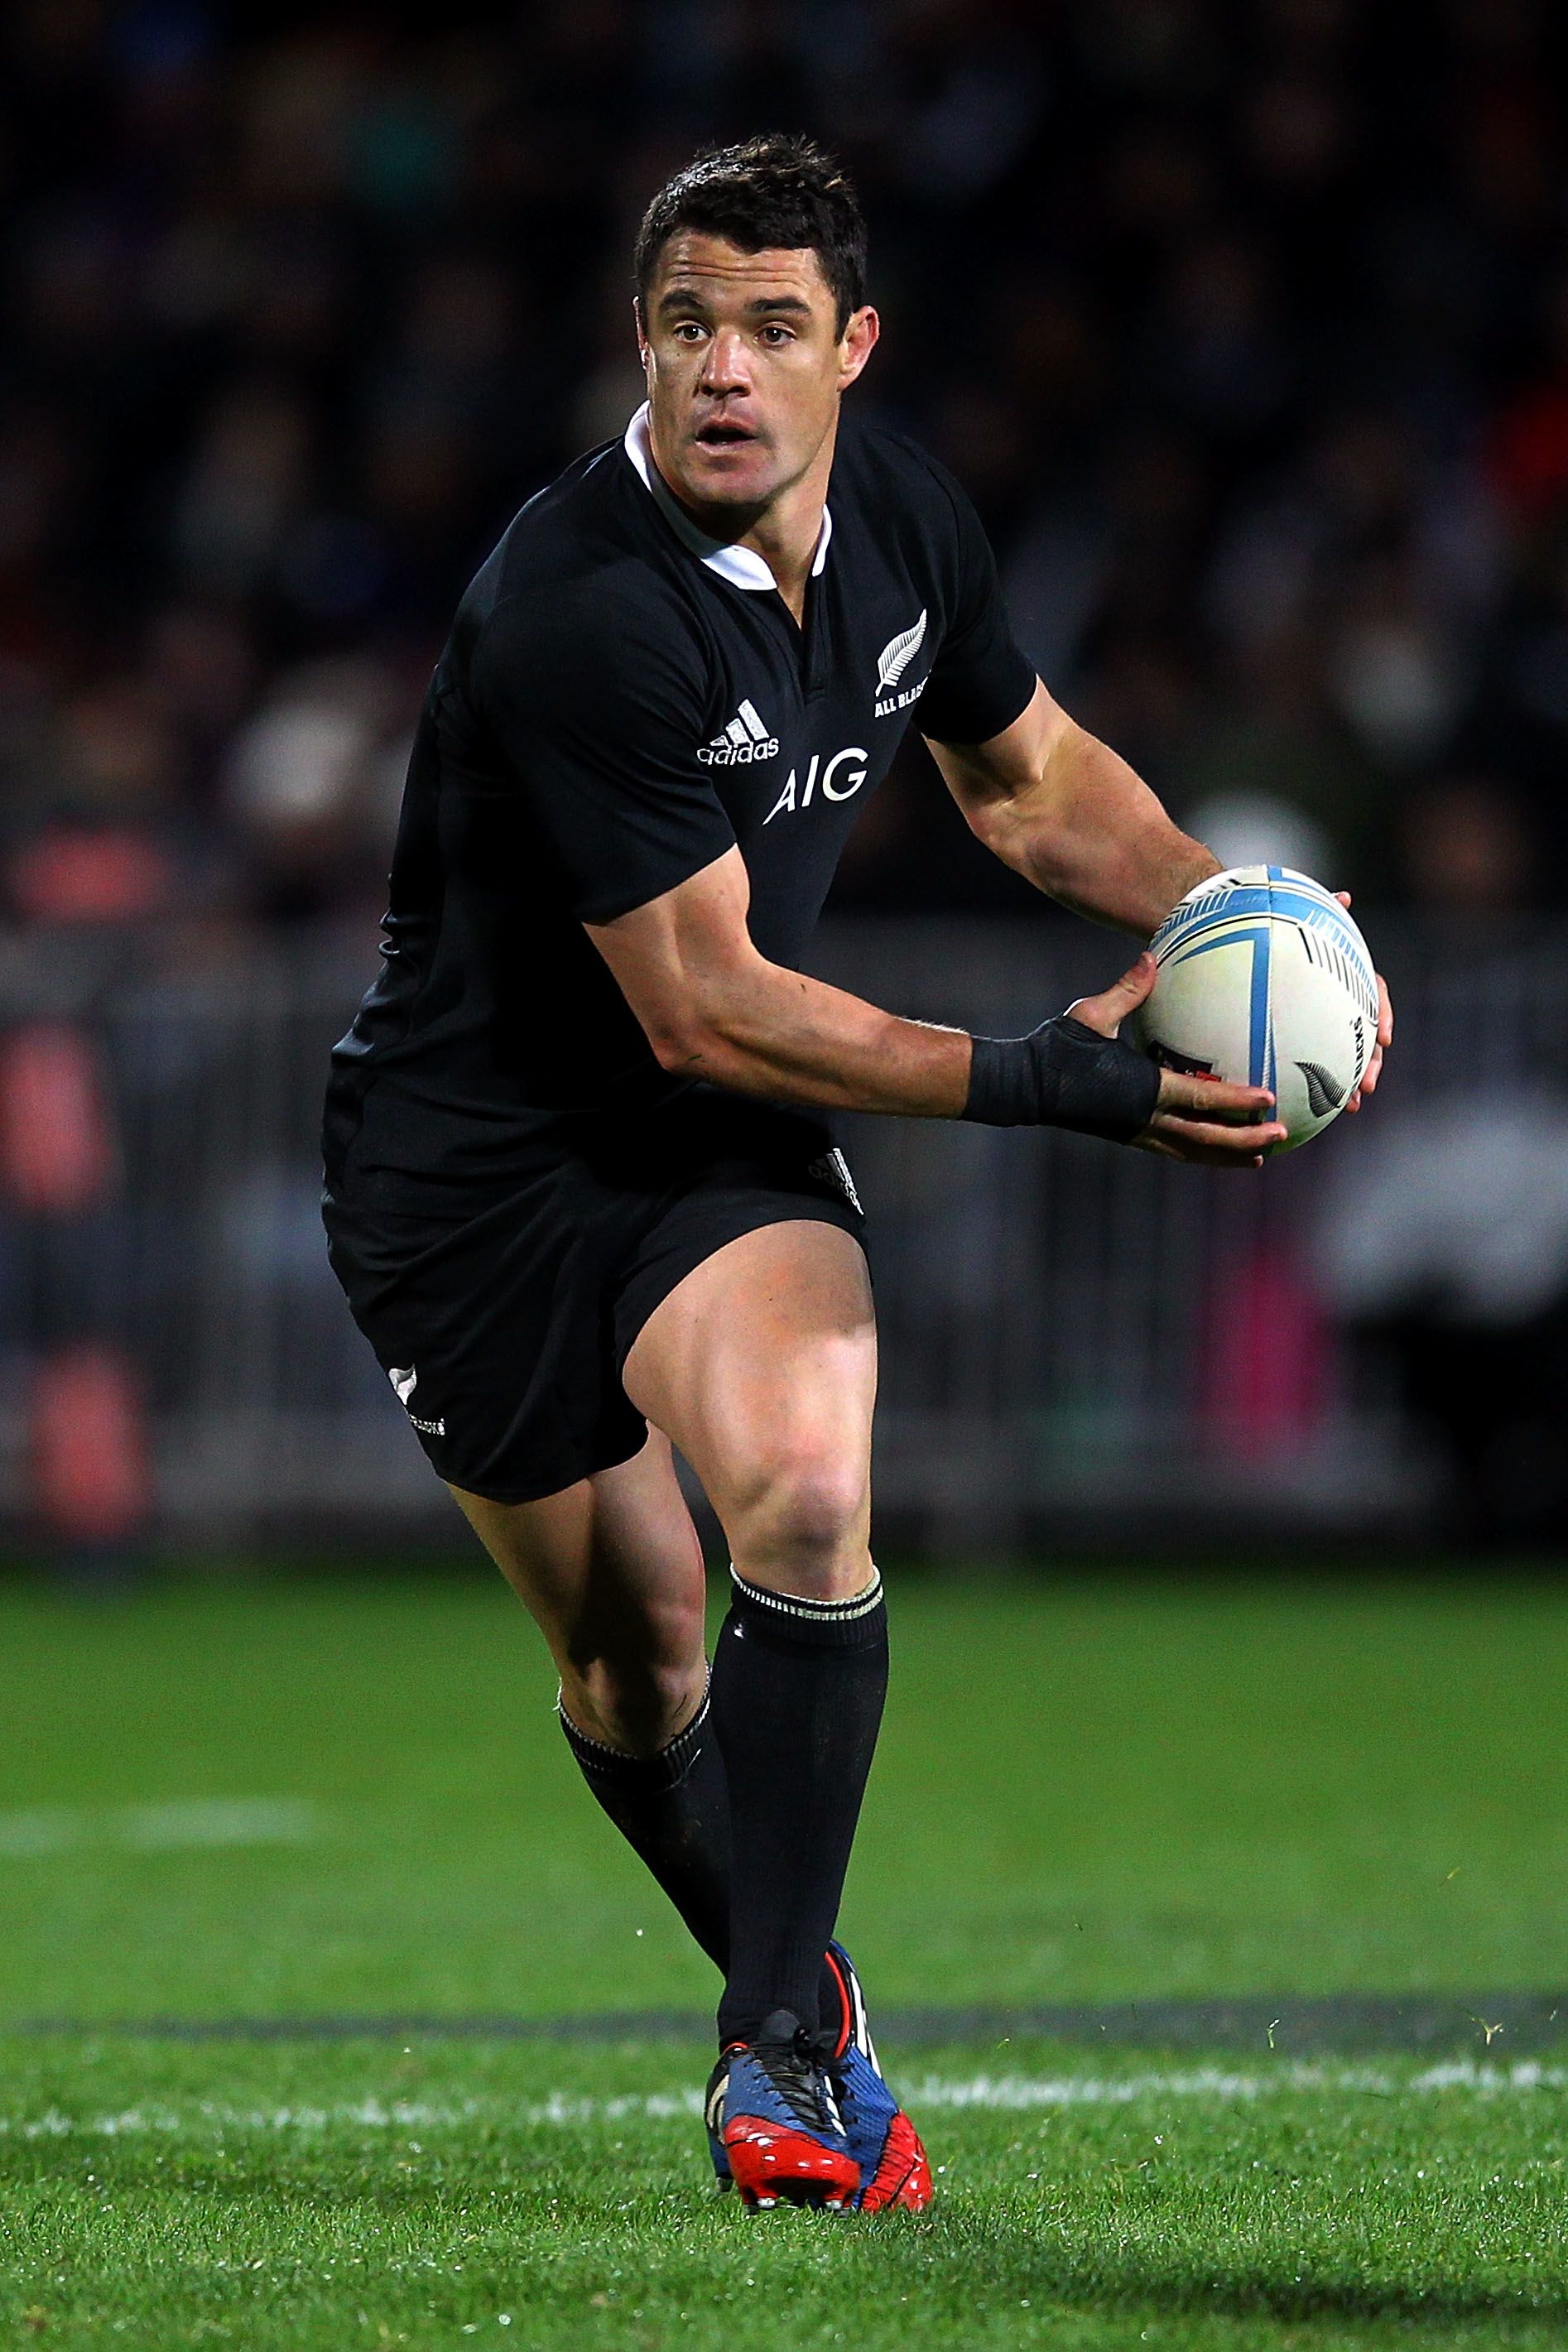 RUNY looking to sign All Blacks great Dan Carter - Americas Rugby News